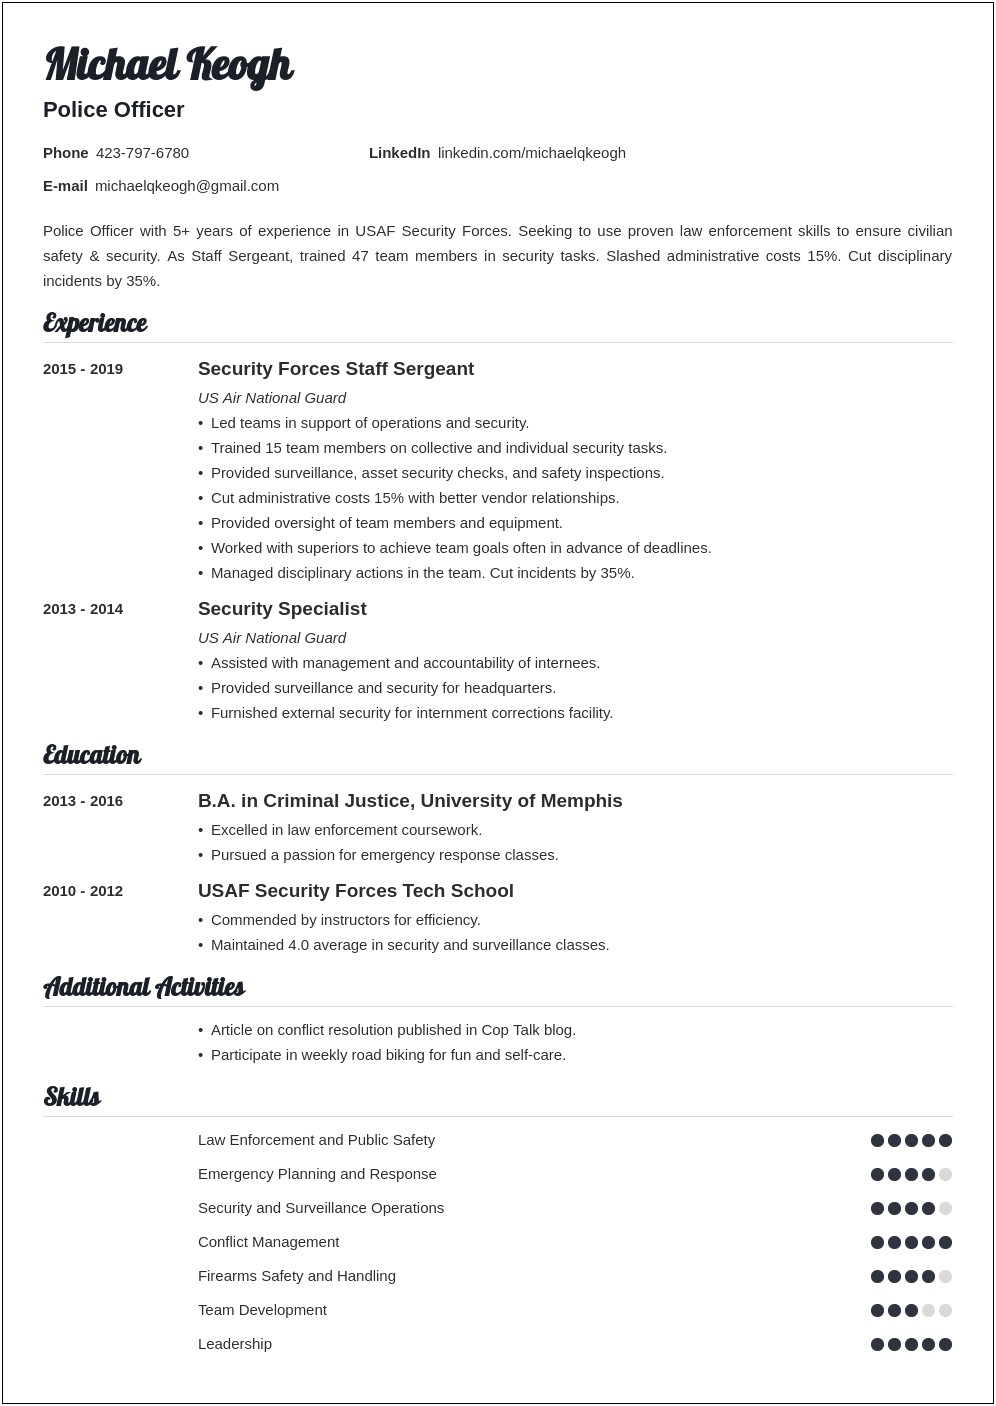 Knowledge Management Air Force Resume